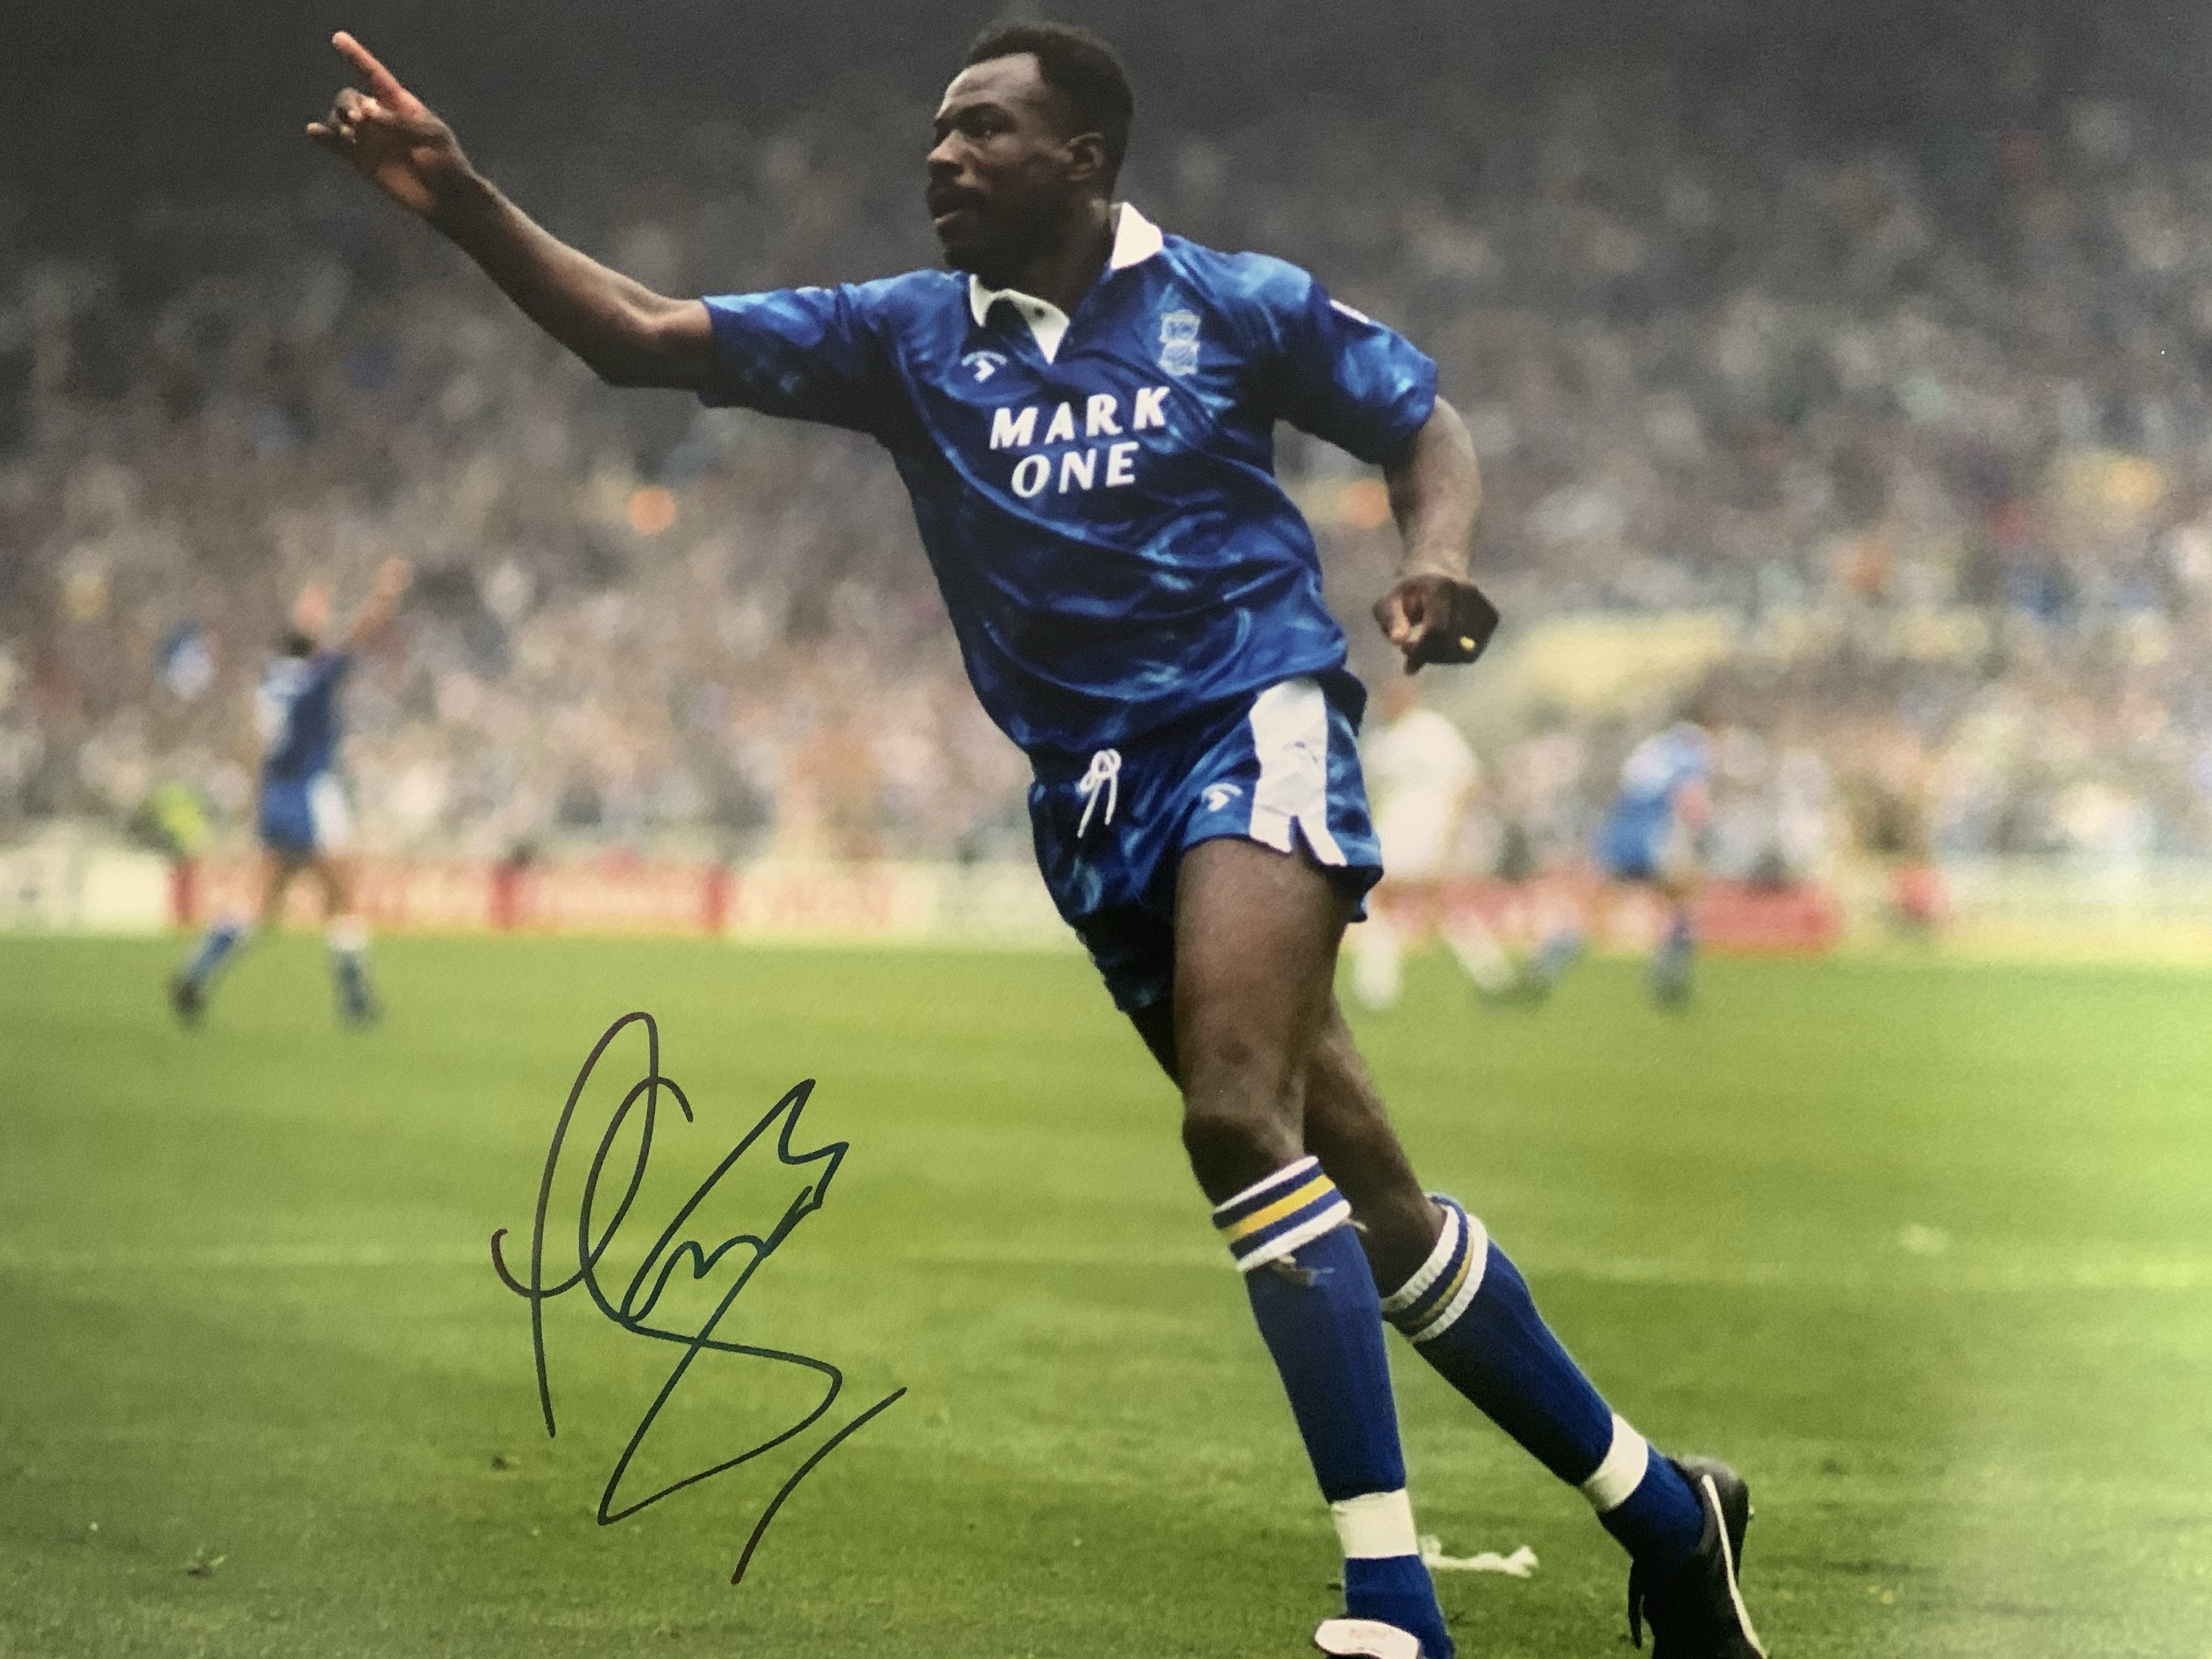 ON THIS DAY IN HISTORY SPECIAL OFFER! Today only! John Gayle Unframed Signed Leyland Daf Cup Final 16 x 12" colour photo